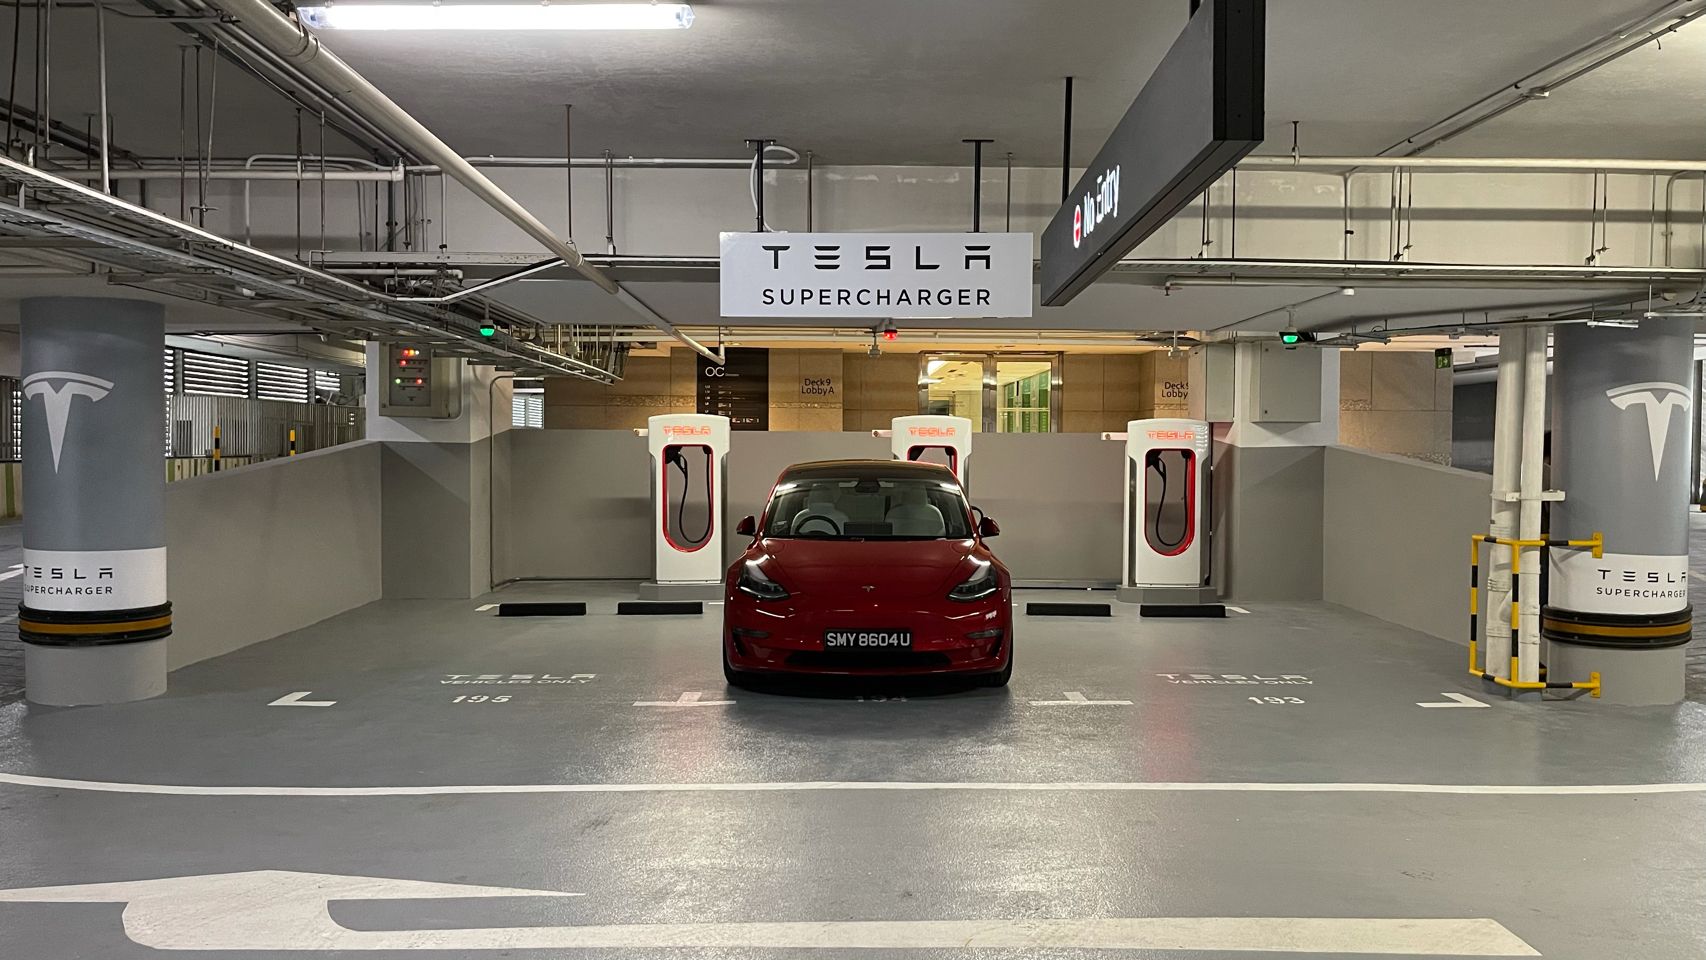 Tesla launches first V3 Superchargers in Singapore ahead of initial deliveries